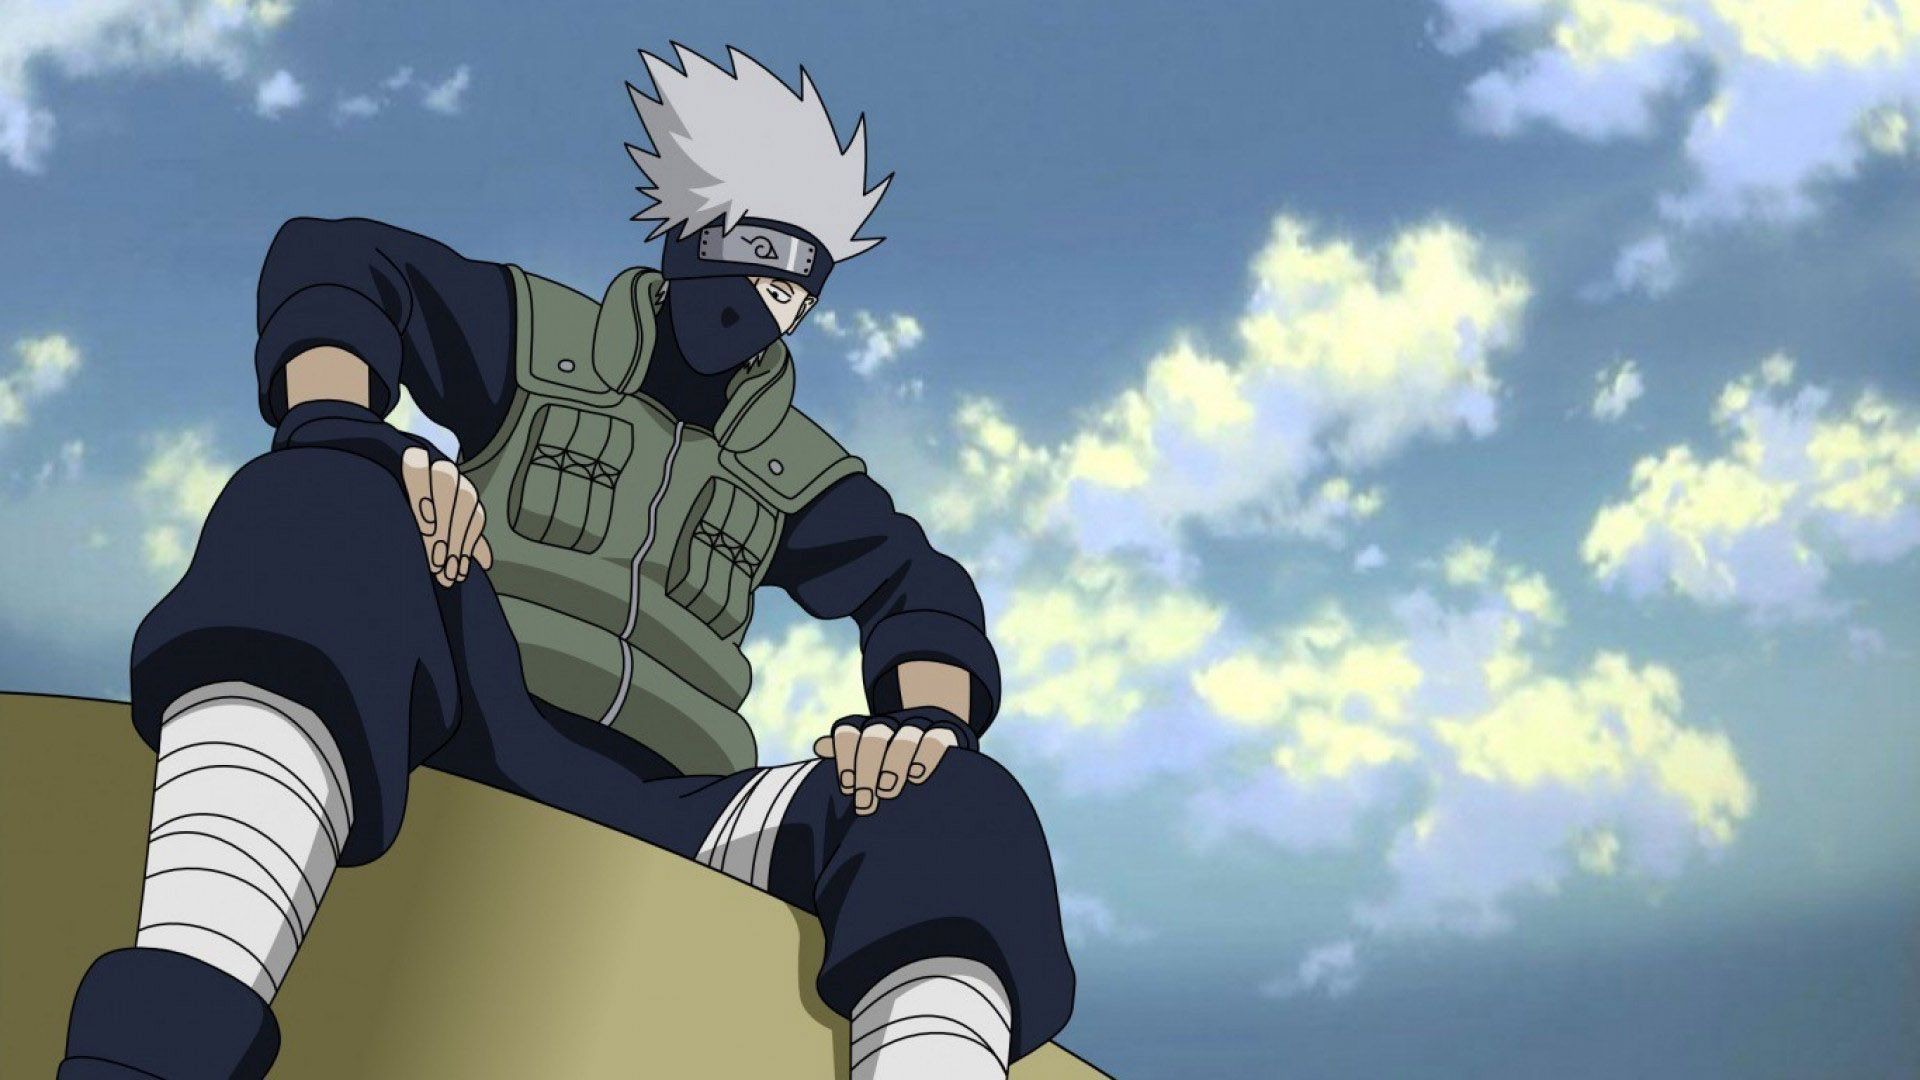 1920x1080 hd kakashi wallpapers hd desktop wallpapers amazing images windows  wallpapers smart phone background photos free images high quality colourful  ultra hd ...